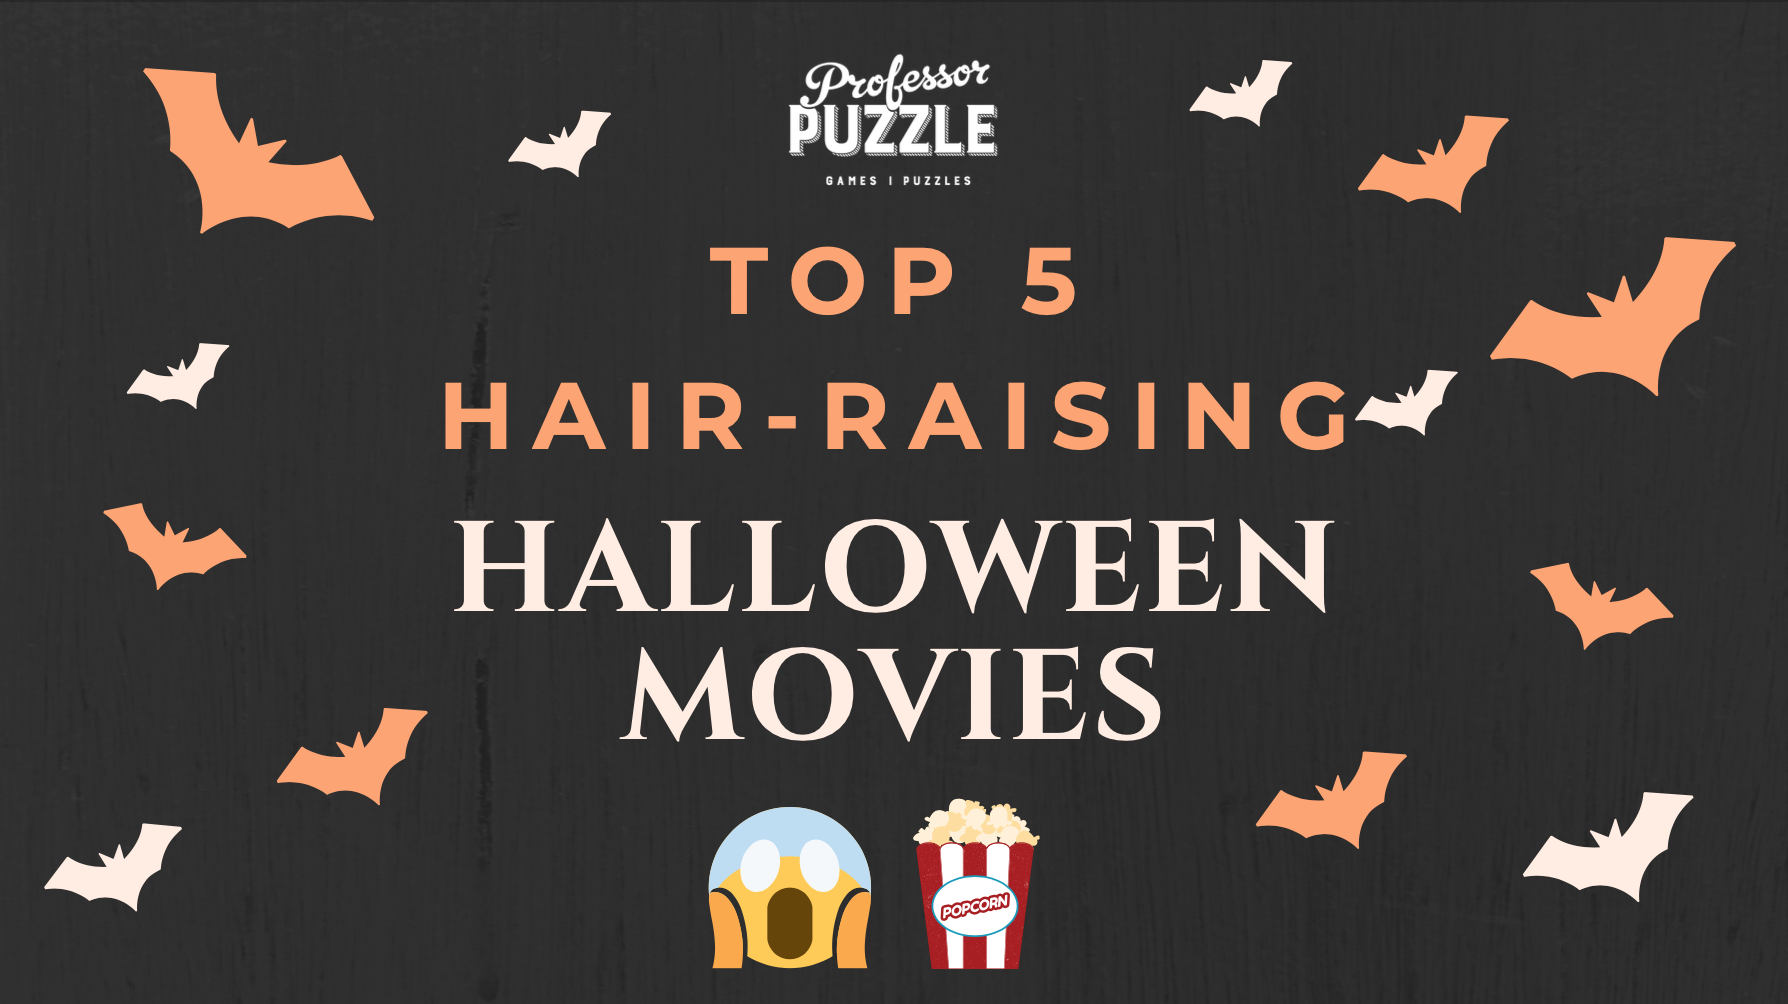 Our top 5 hair-raising Halloween movies (and some games to complement them!)